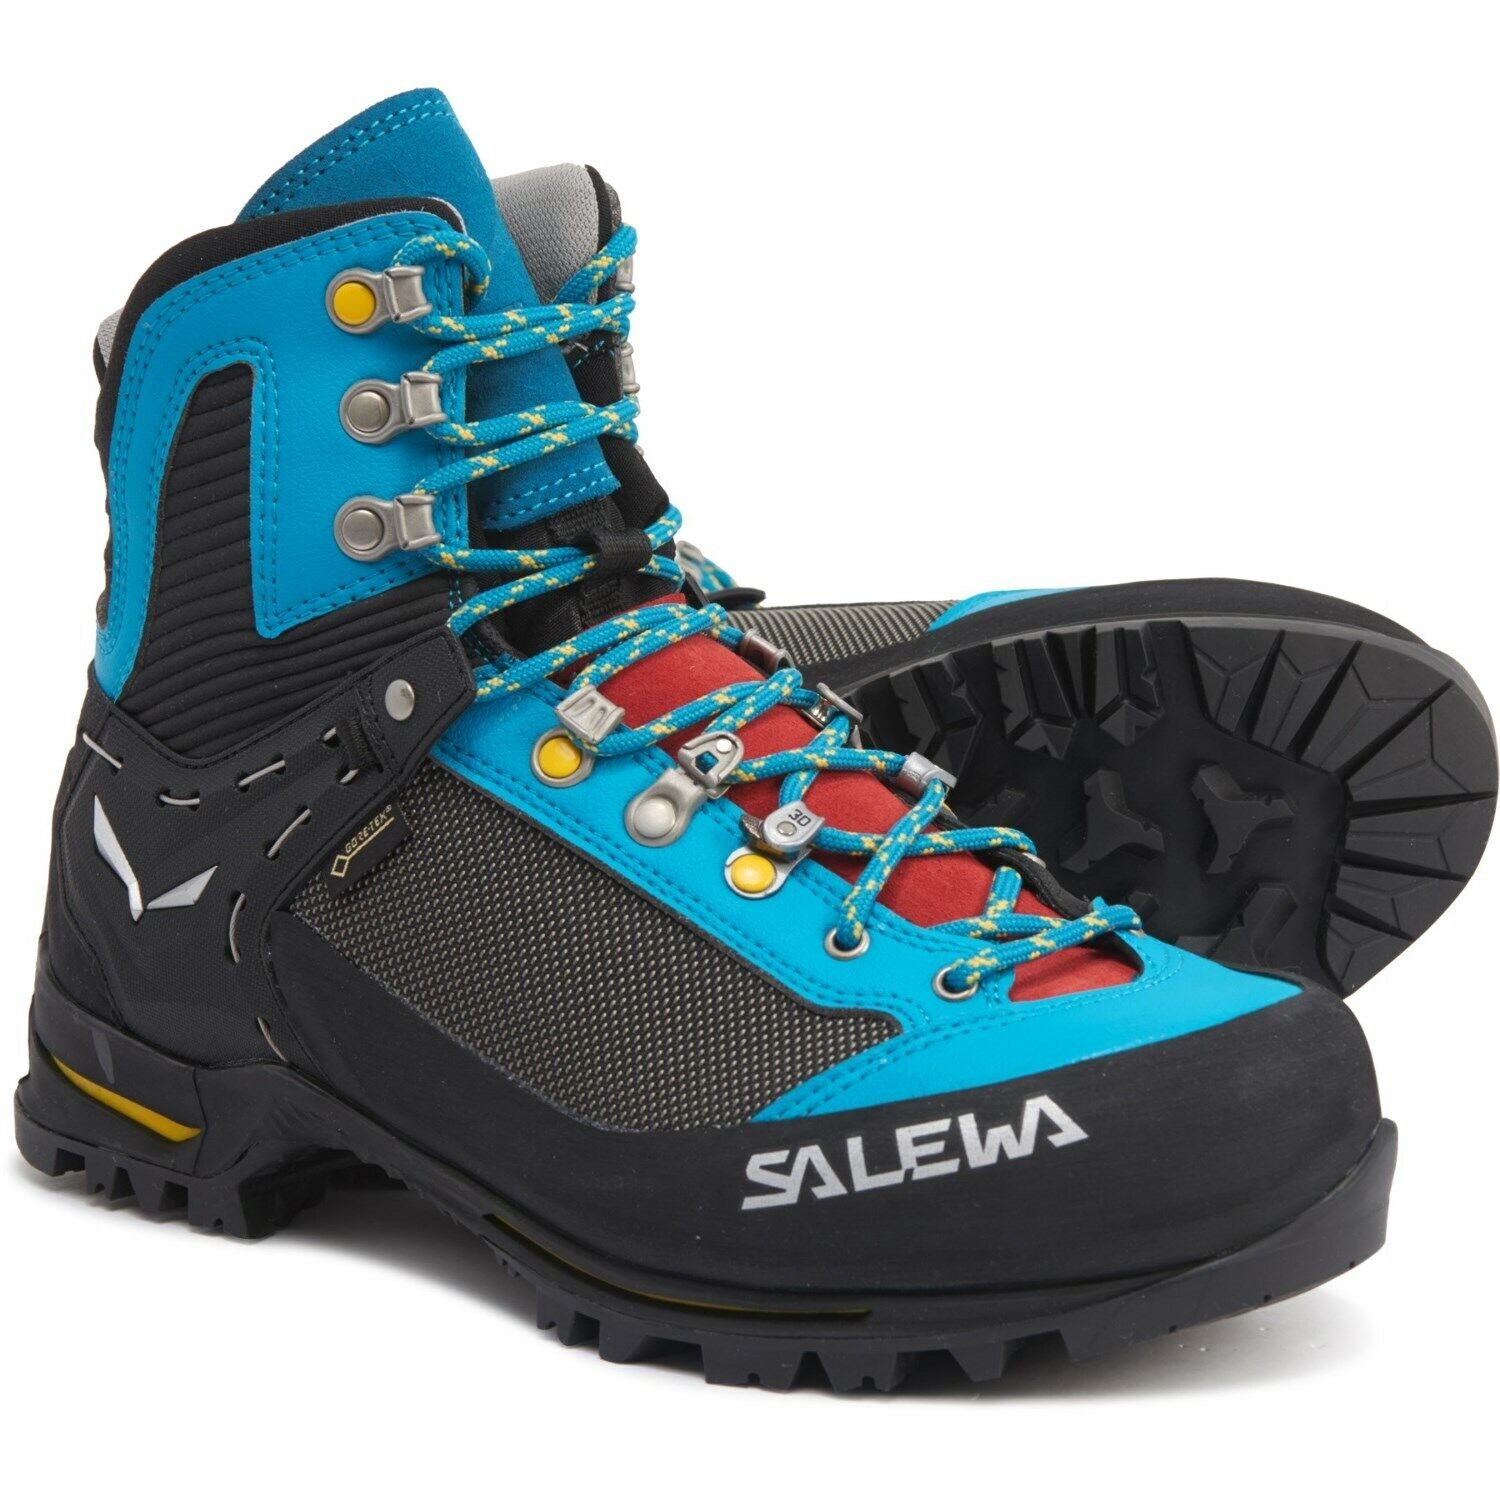 How to Turn Your Men’s Mountaineering Boots into Lethal Weapons?